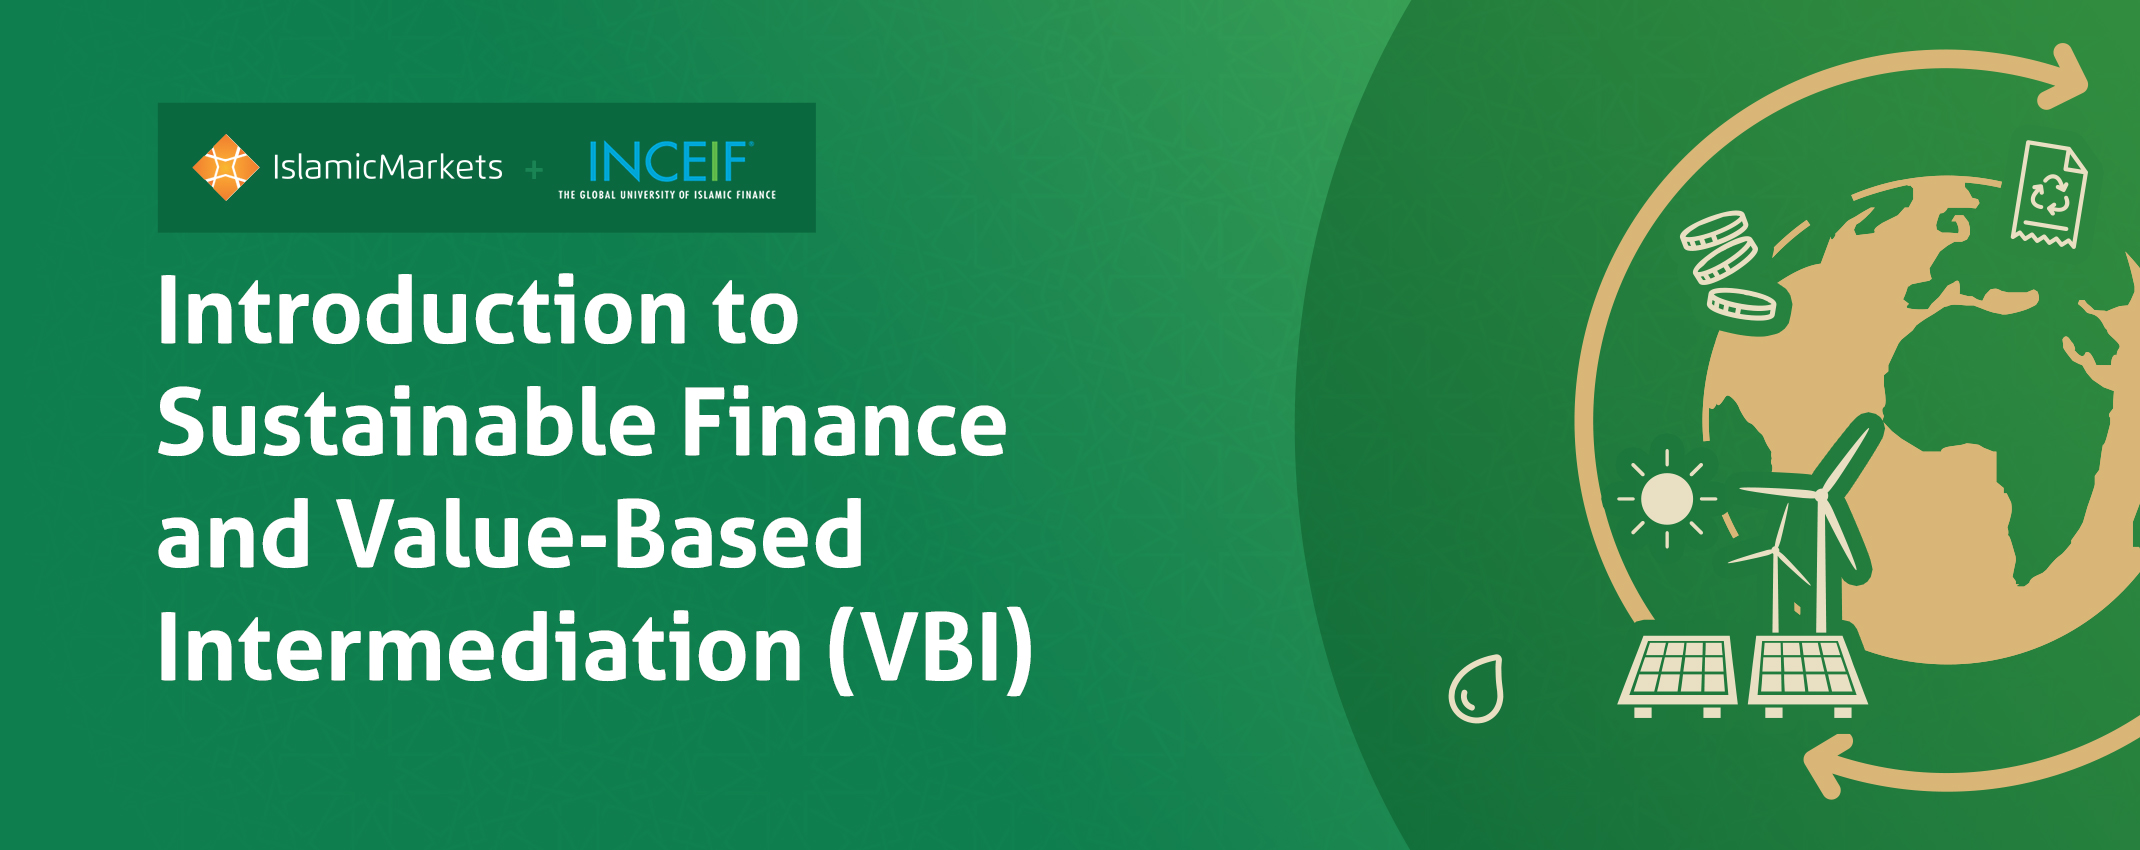 IslamicMarkets and INCEIF Partner to Launch Learning Programme on Sustainable Finance and Value-Based Intermediation (VBI) 